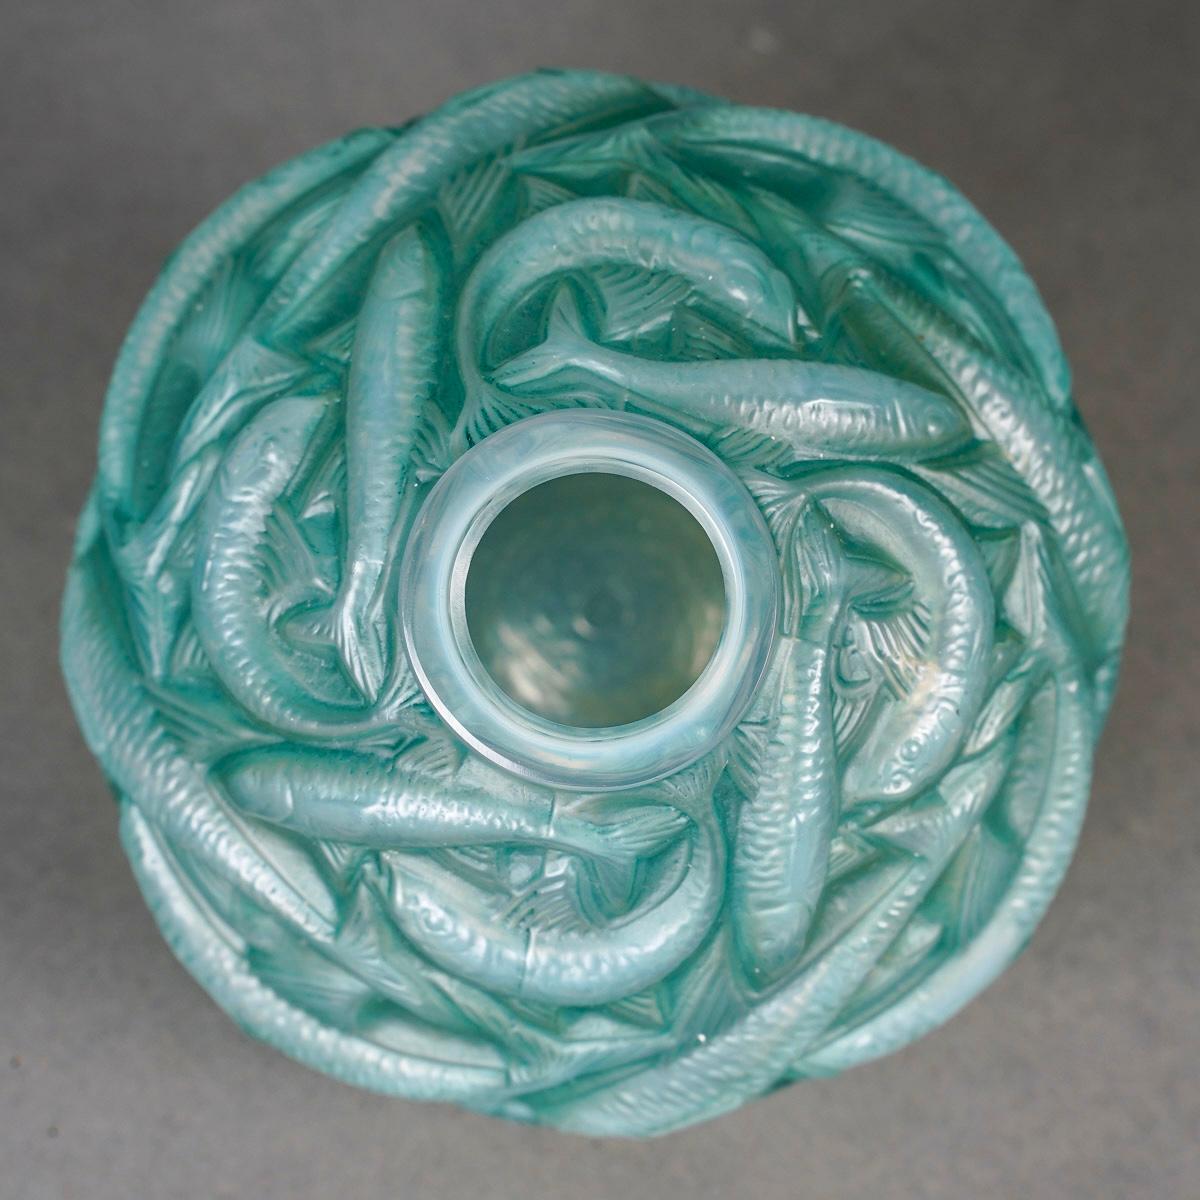 Art Deco 1927 René Lalique Vase Oleron Cased Opalescent Glass with Green Patina